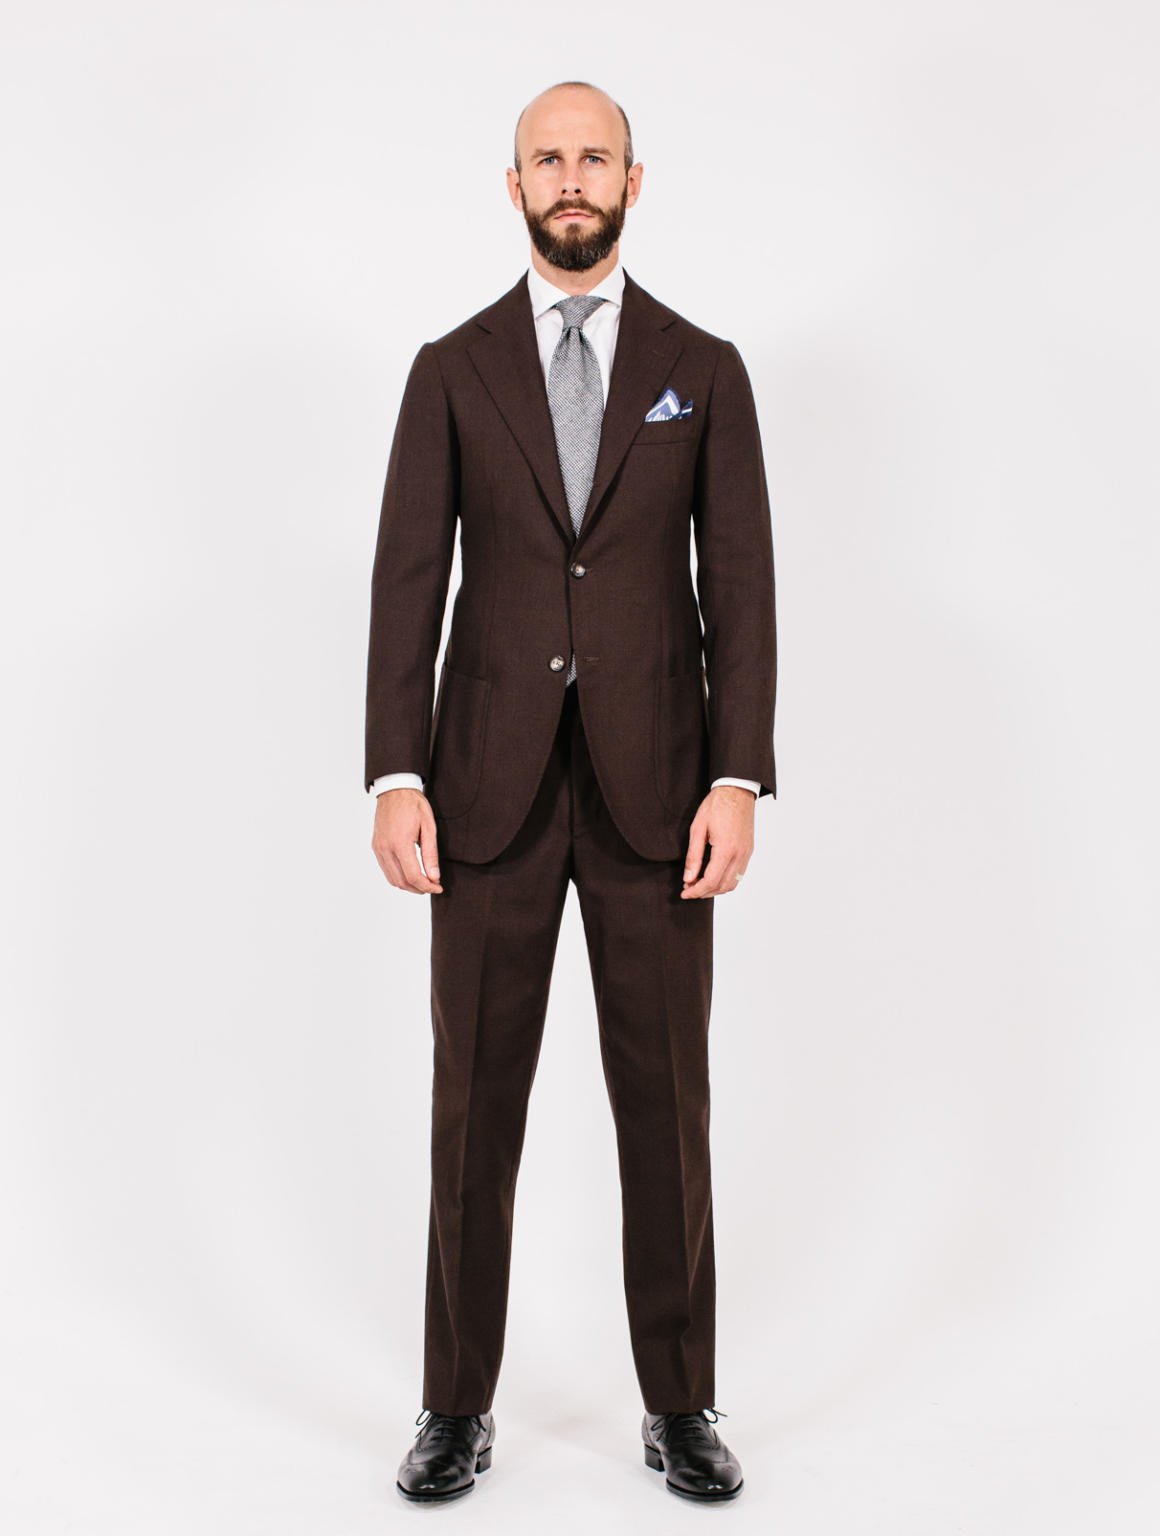 Dalcuore brown suit: Style Breakdown – Permanent Style